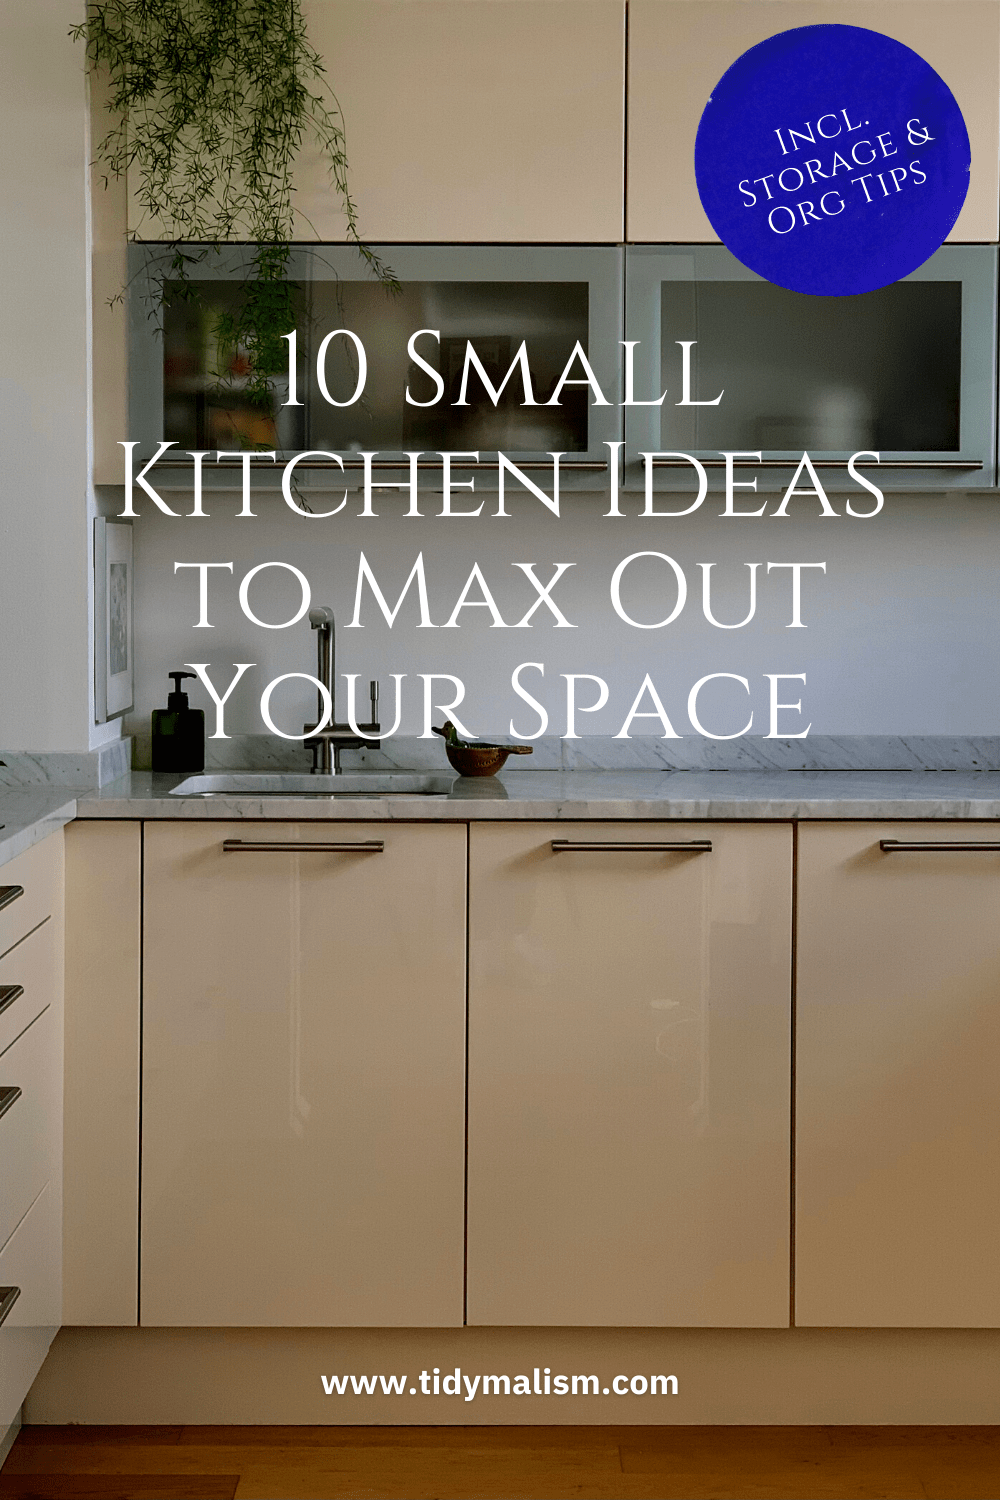 12 Tips for Maximizing Space in Small Kitchens